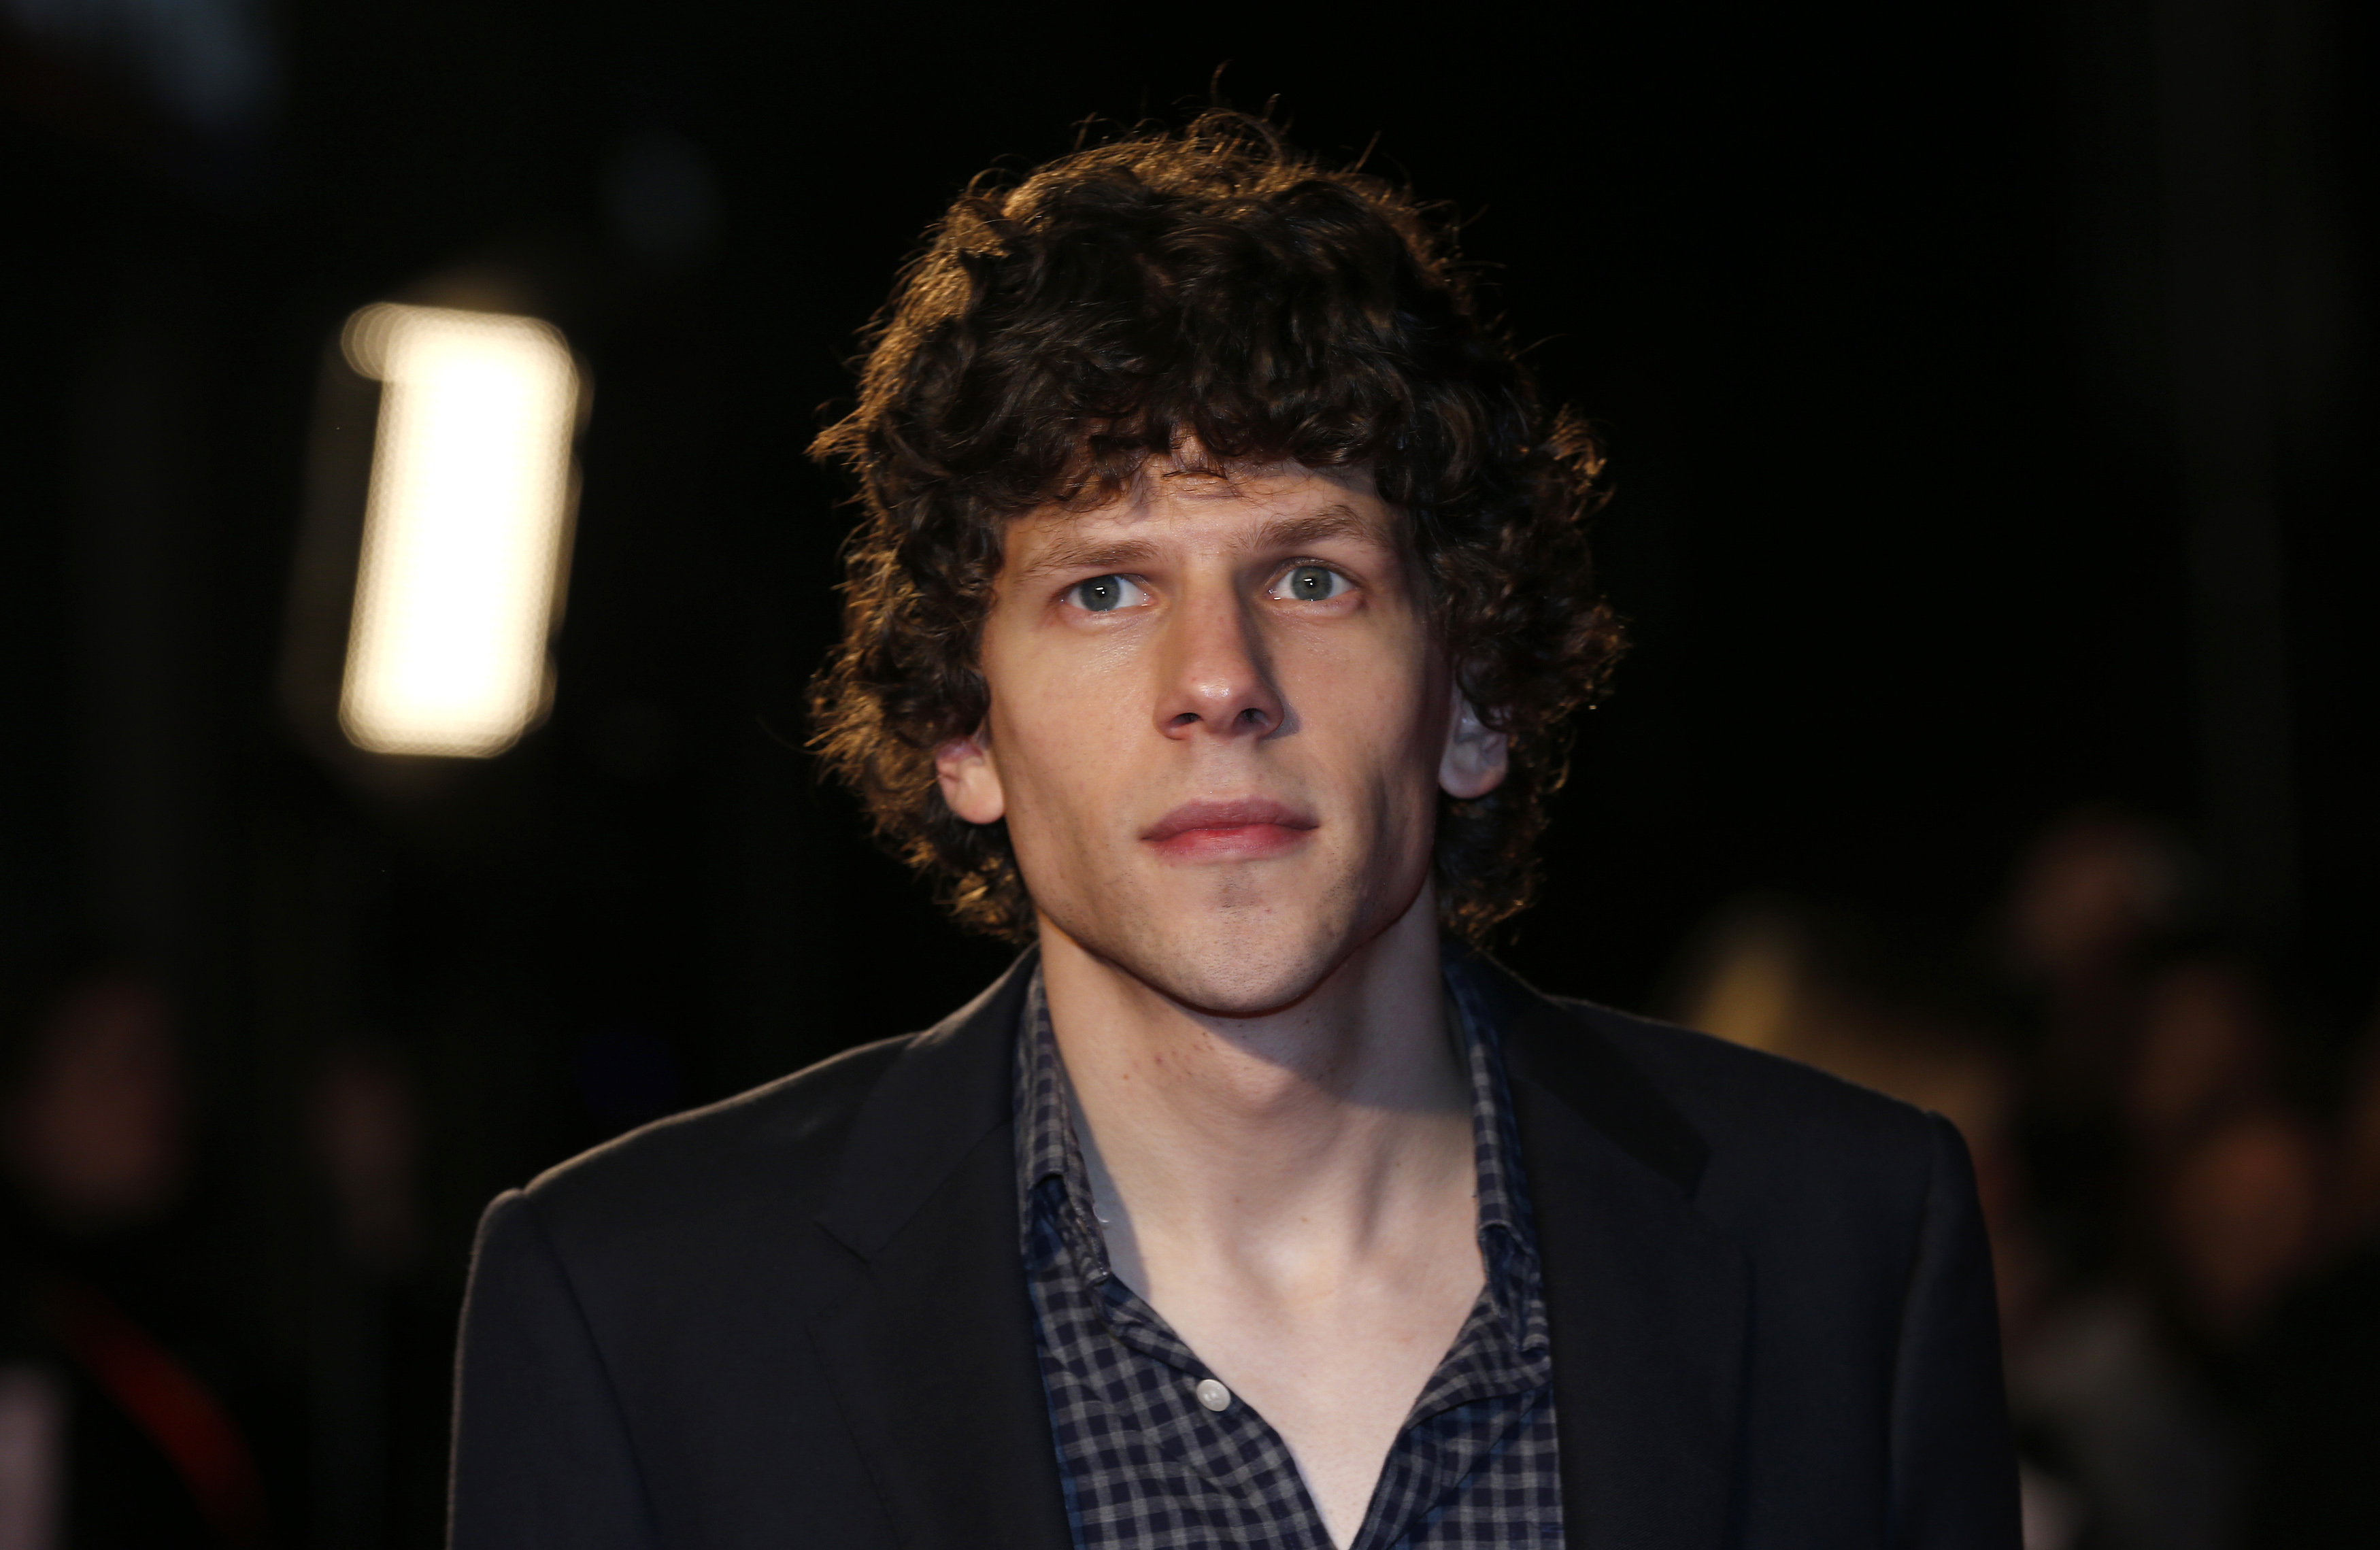 Cast member Jesse Eisenberg arrives for the European premiere of "The Double" at the London Film Festival, at the Odeon West End, in central London October 12, 2013. (Suzanne Plunkett—Reuters)